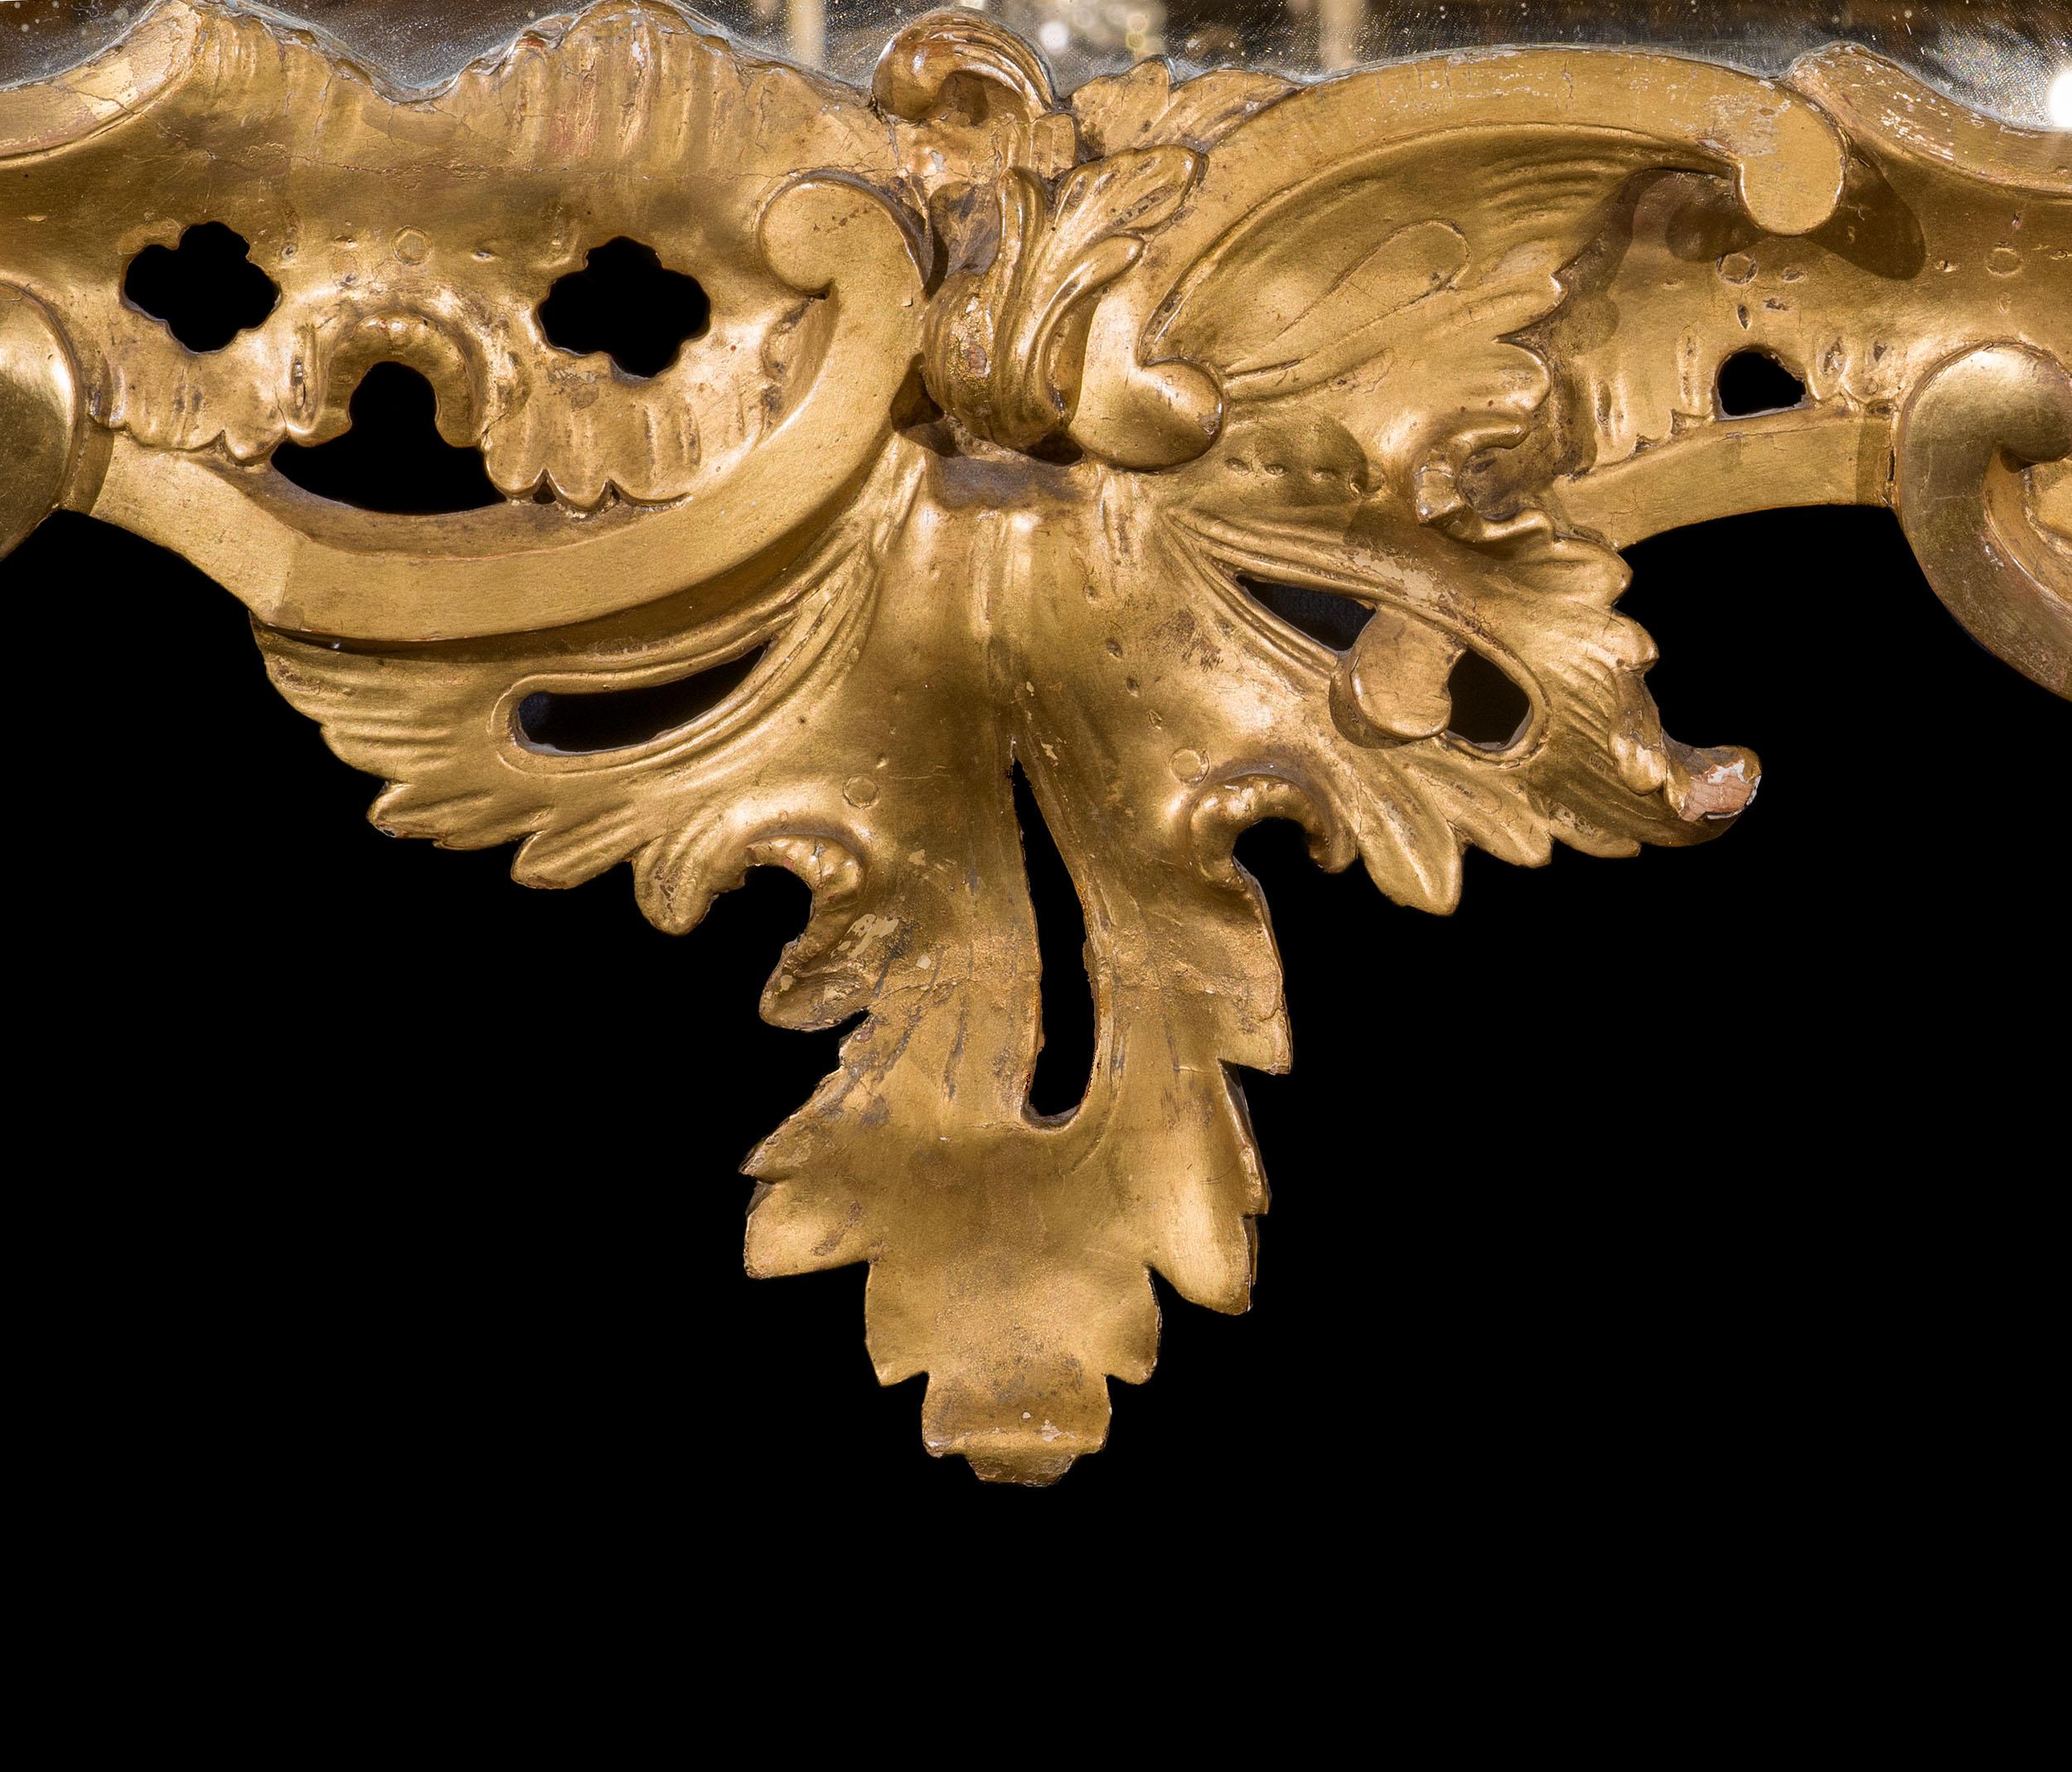 A very unusual George III Rococo wall mirror. The giltwood frame is carved with a wonderfully organic design, with foliate flourishes, trailing flowers and fruit, but the most unusual detail being the asymmetrical interlocking c scrolls to the lower